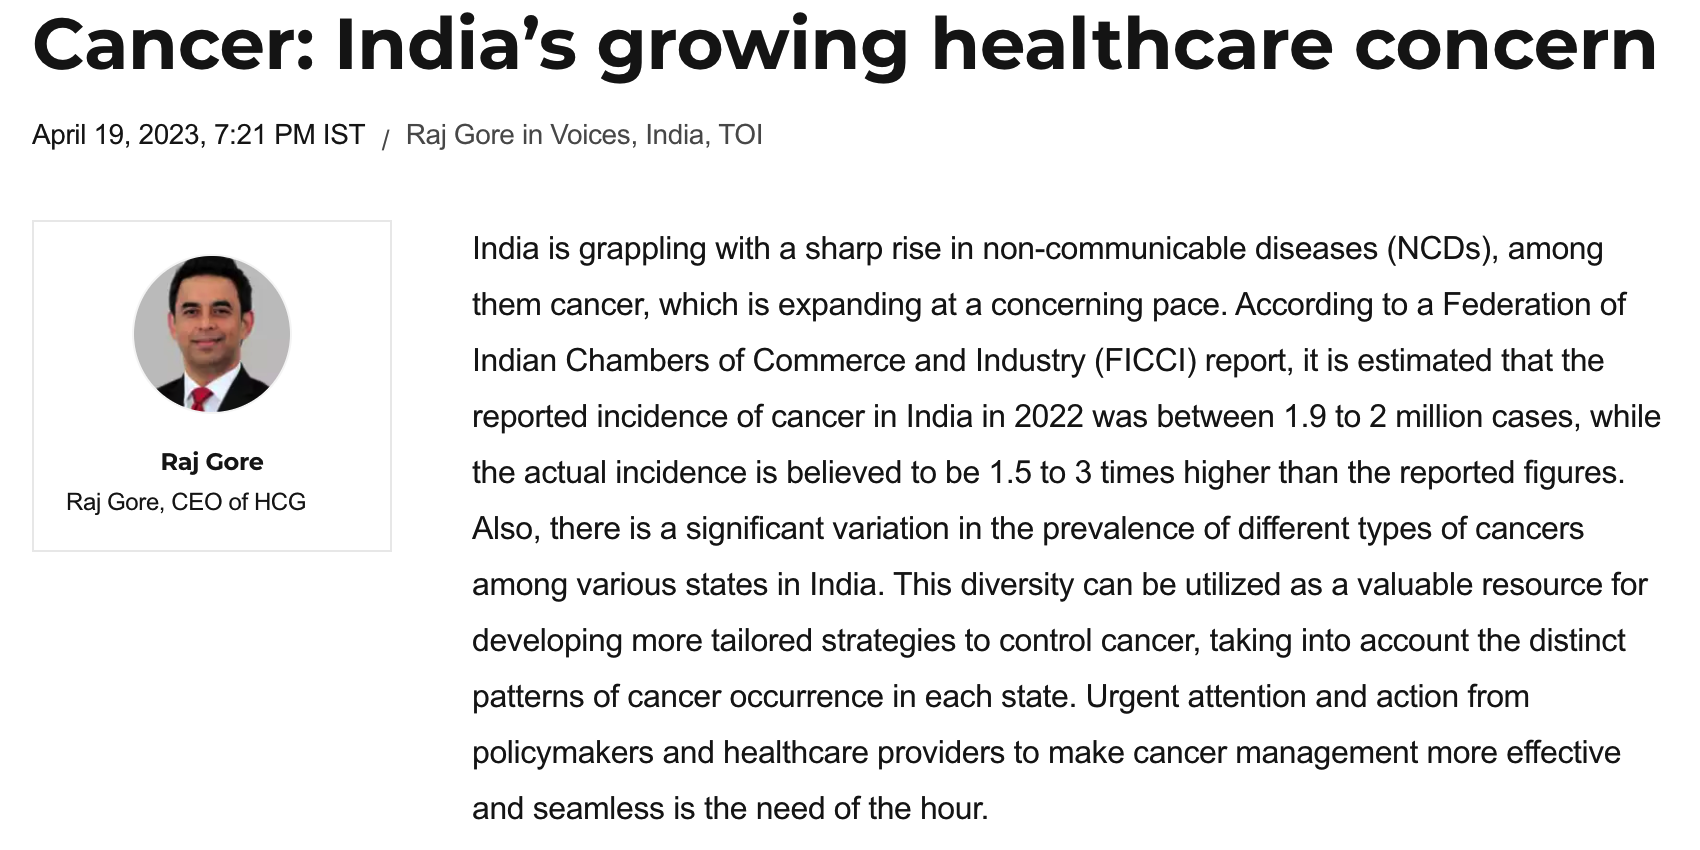 Cancer: India’s growing healthcare concern